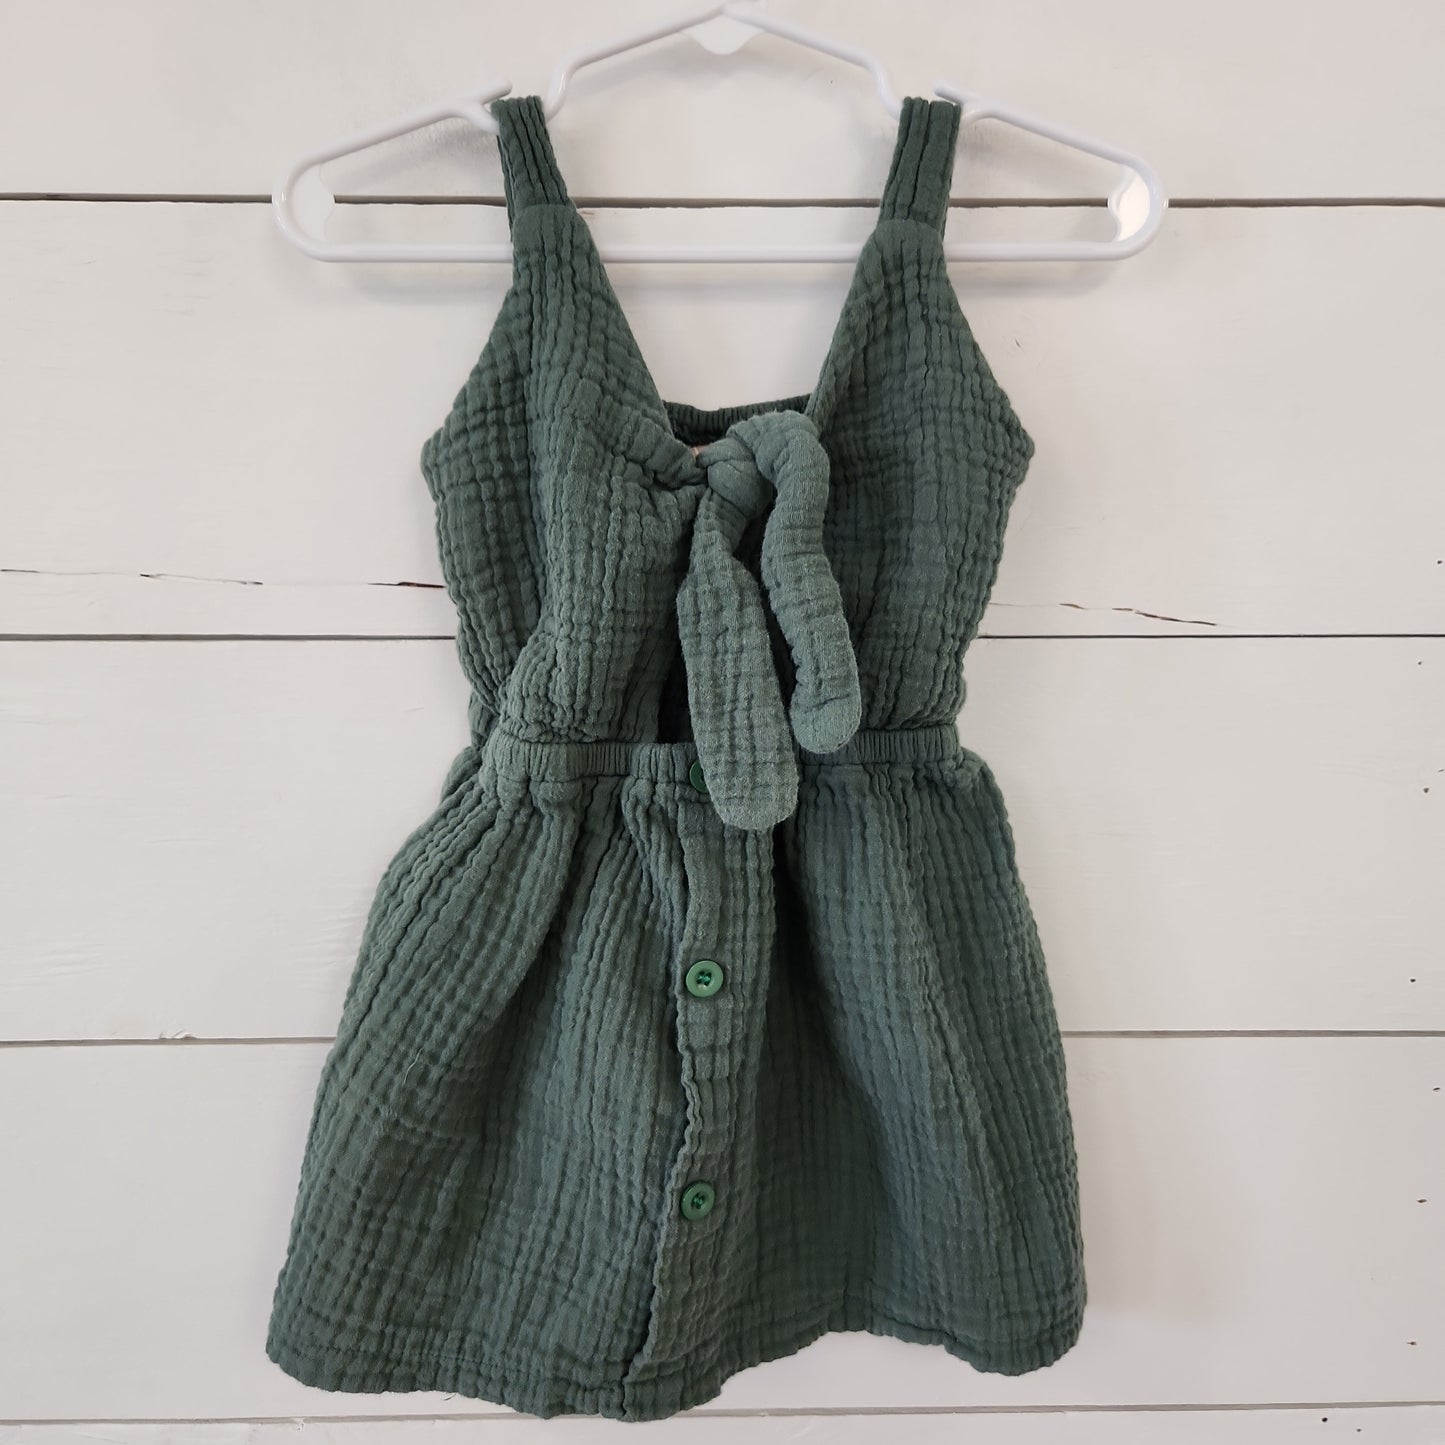 Size 2t | Unbranded Dress | Secondhand